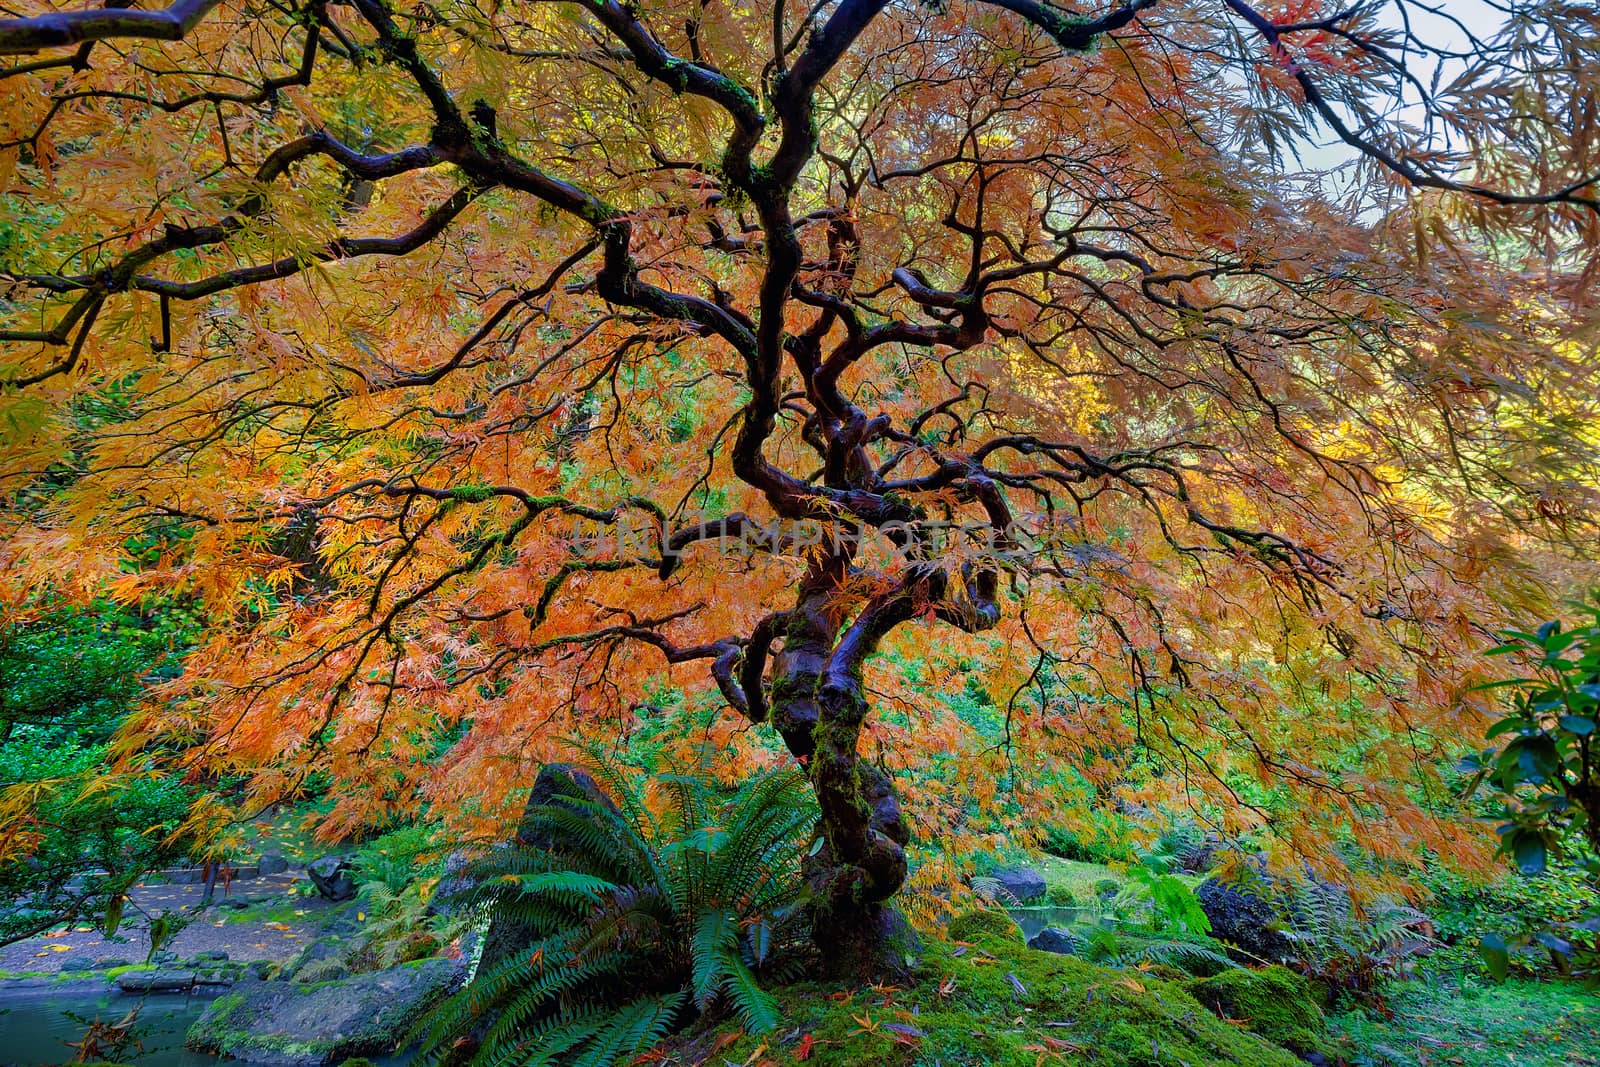 The Japanese Maple Tree is full fall colors at Japanese Garden in Autumn